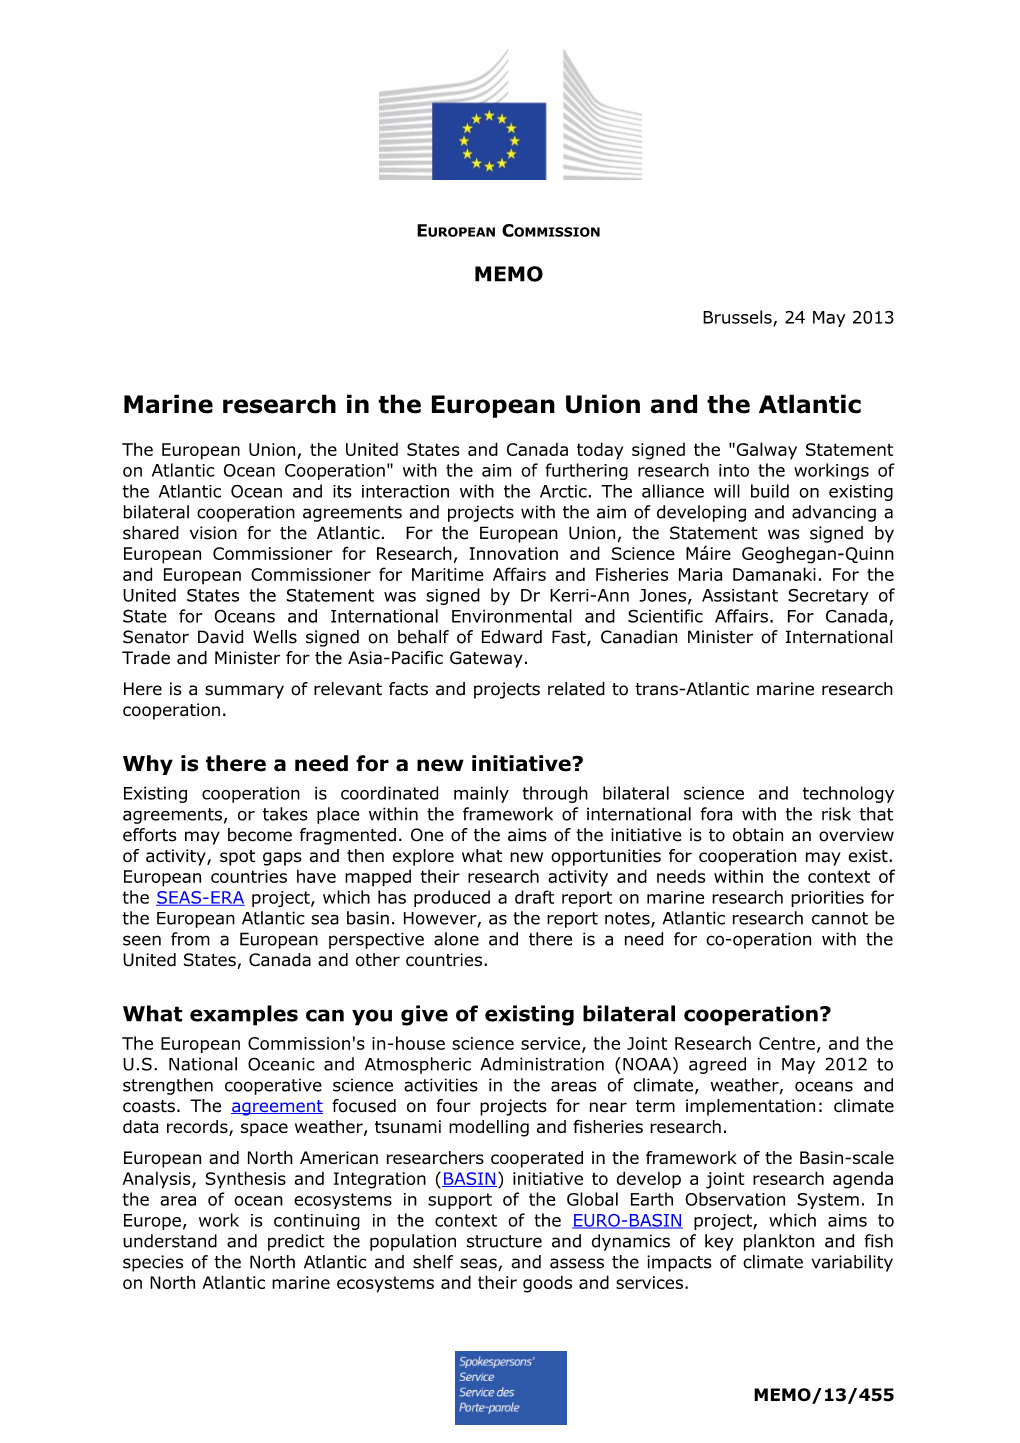 Marine Research in the European Union and the Atlantic